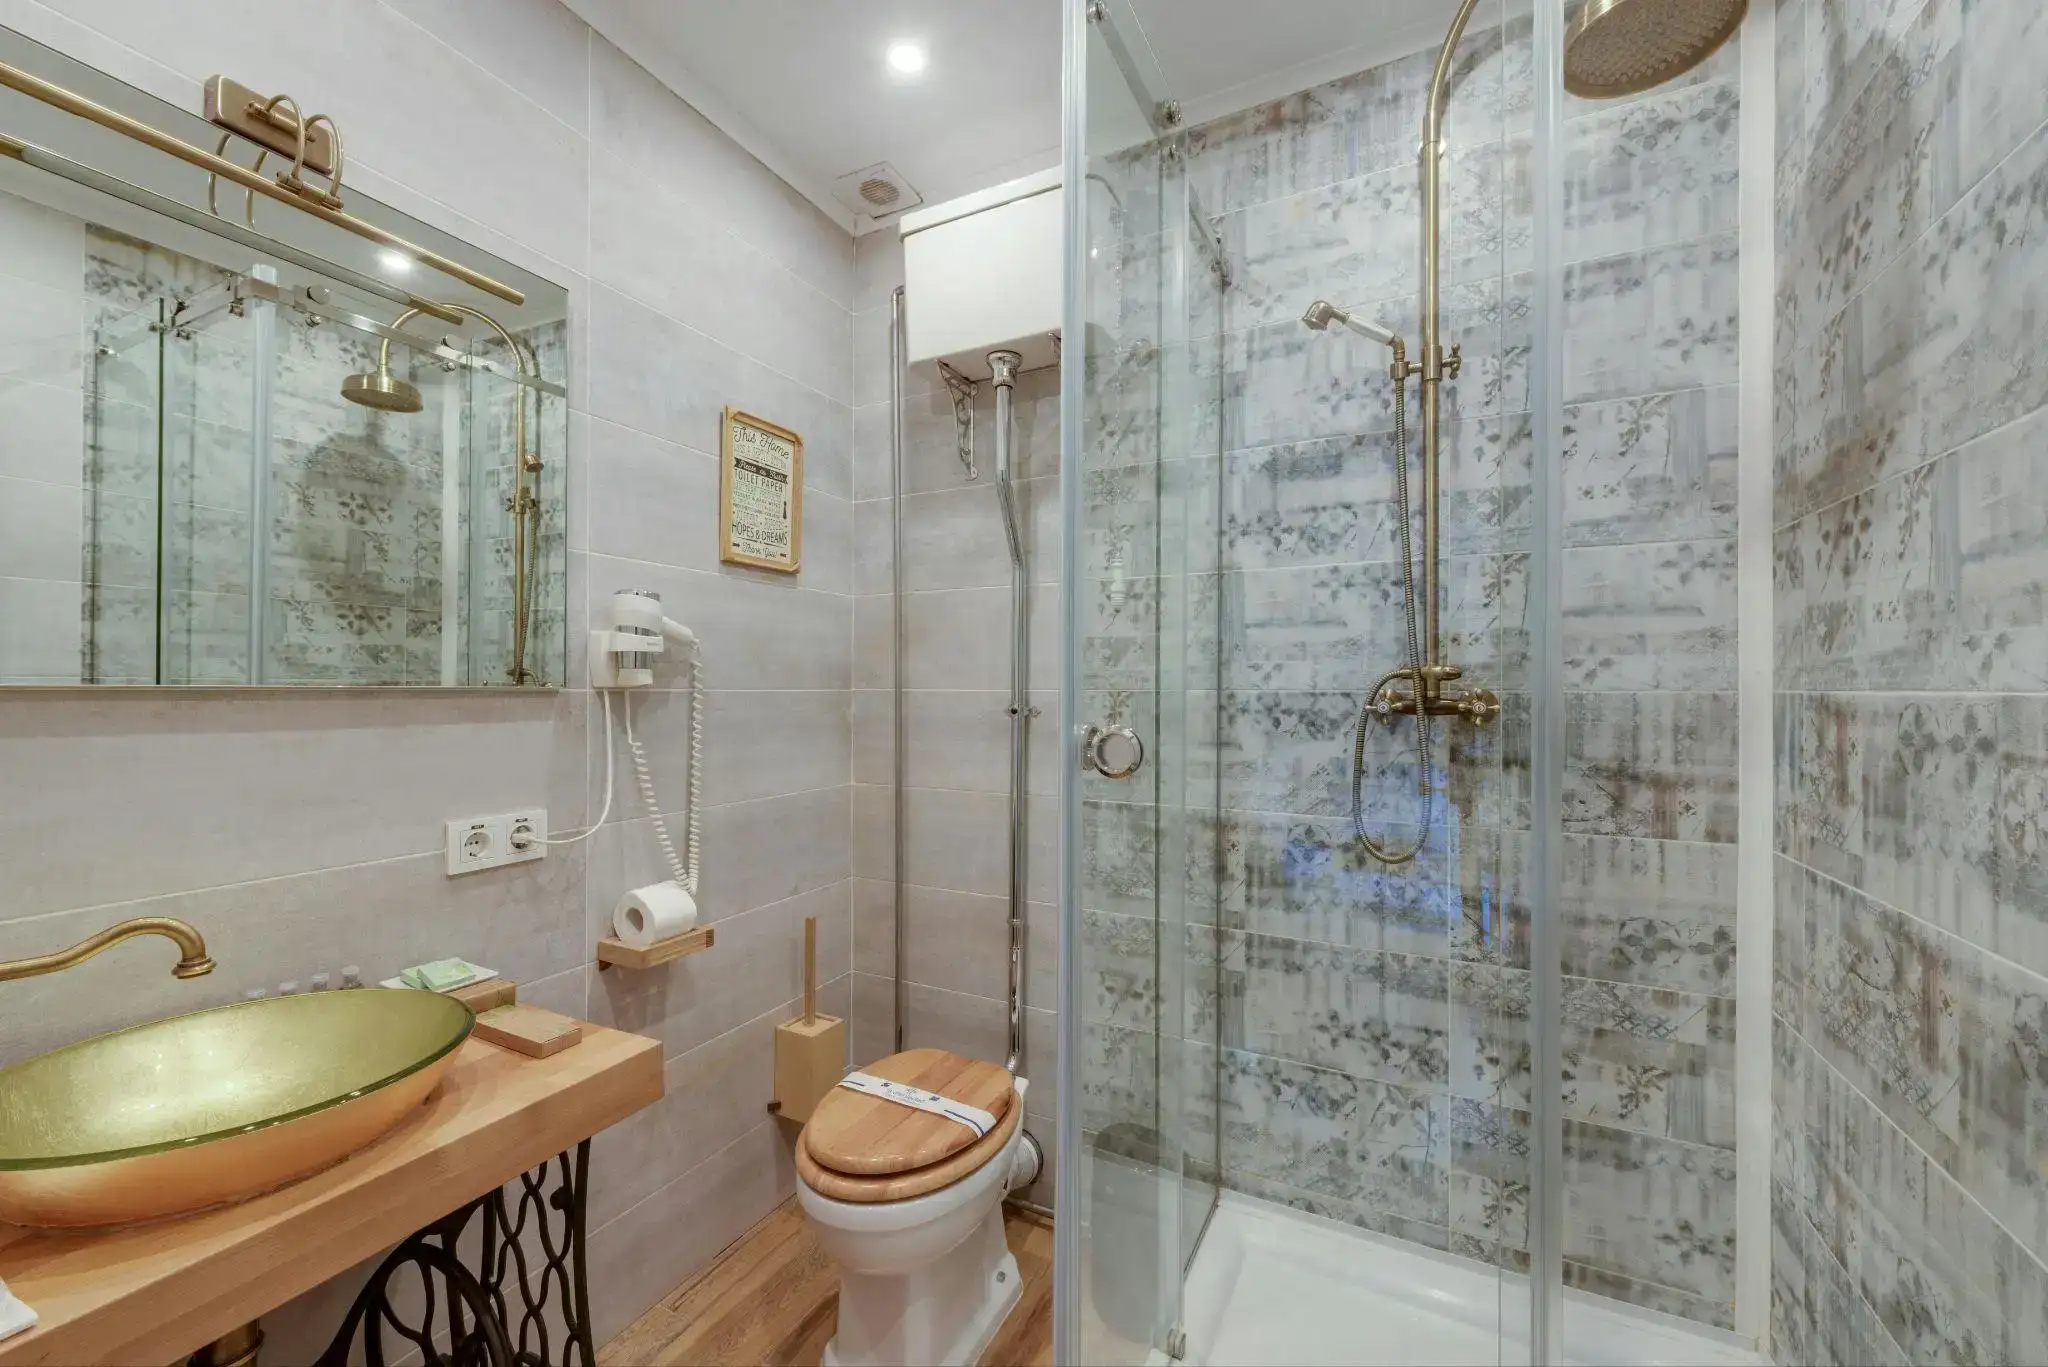 9 Bathroom Upgrades That Are Worth the Investment